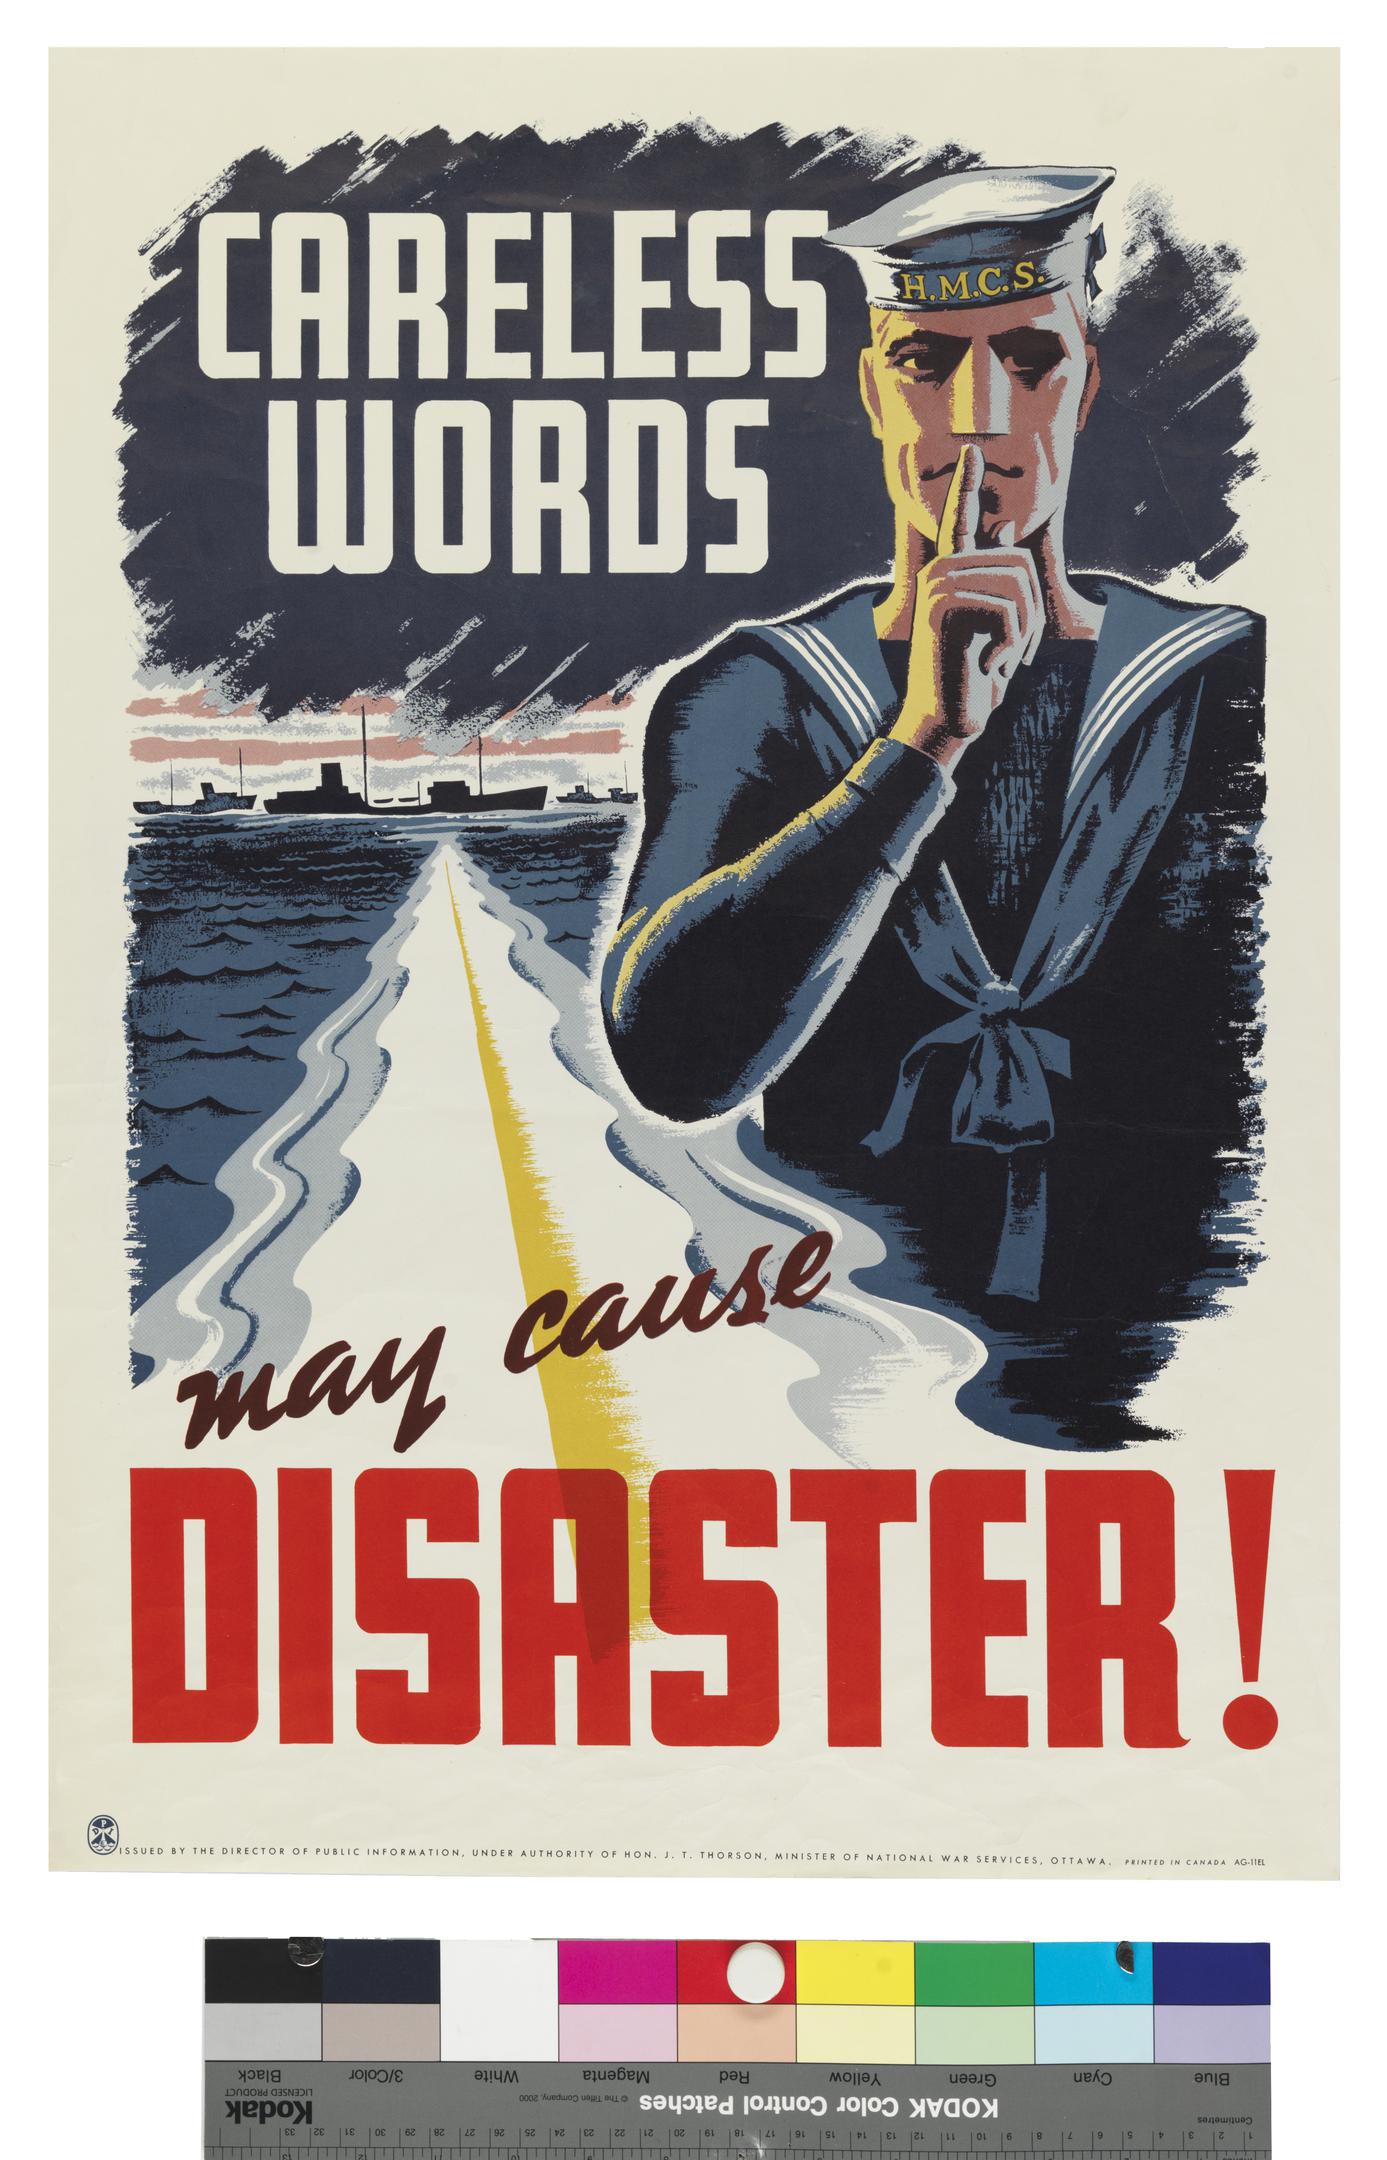 wartime security poster, CARELESS WORDS may cause DISASTER!